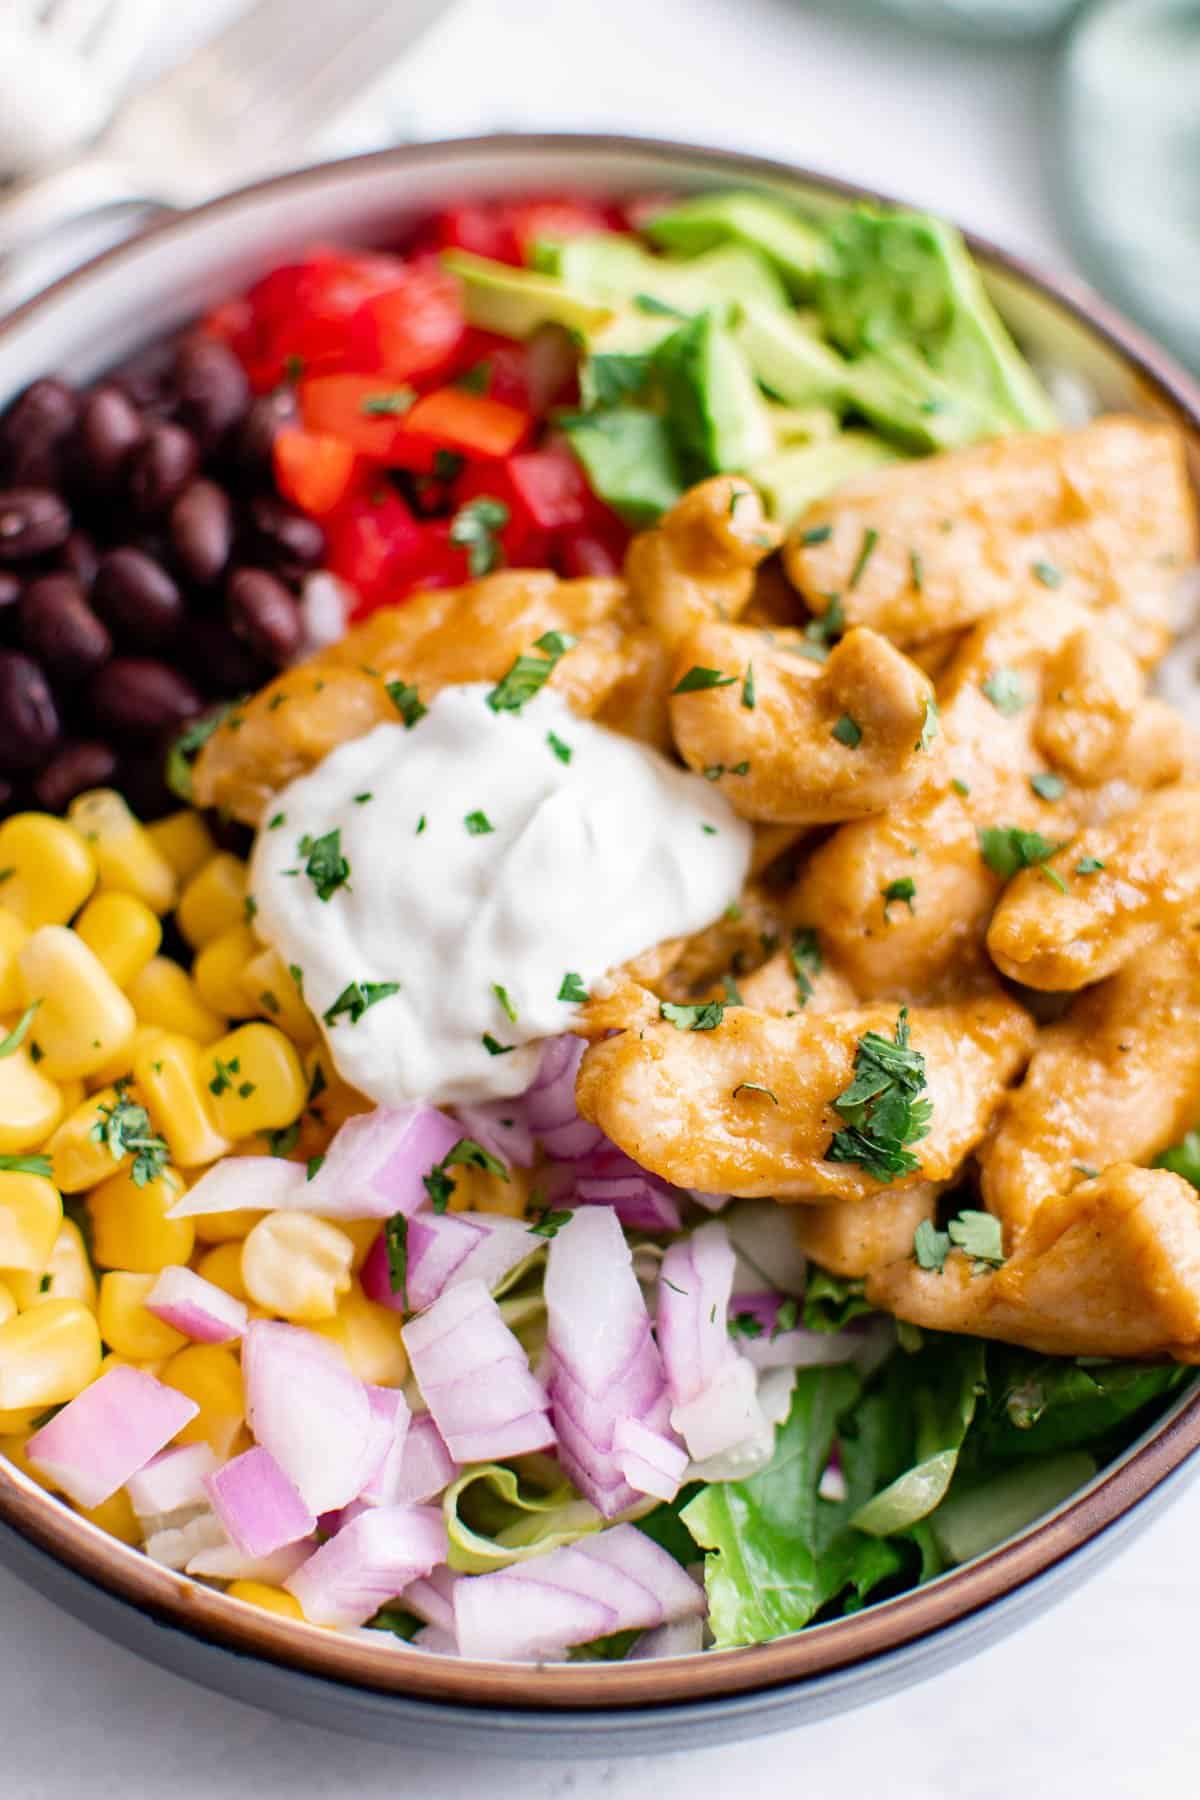 a burrito bowl, filled with chicken, onion, corn, beans, rice, avocado, and sour cream